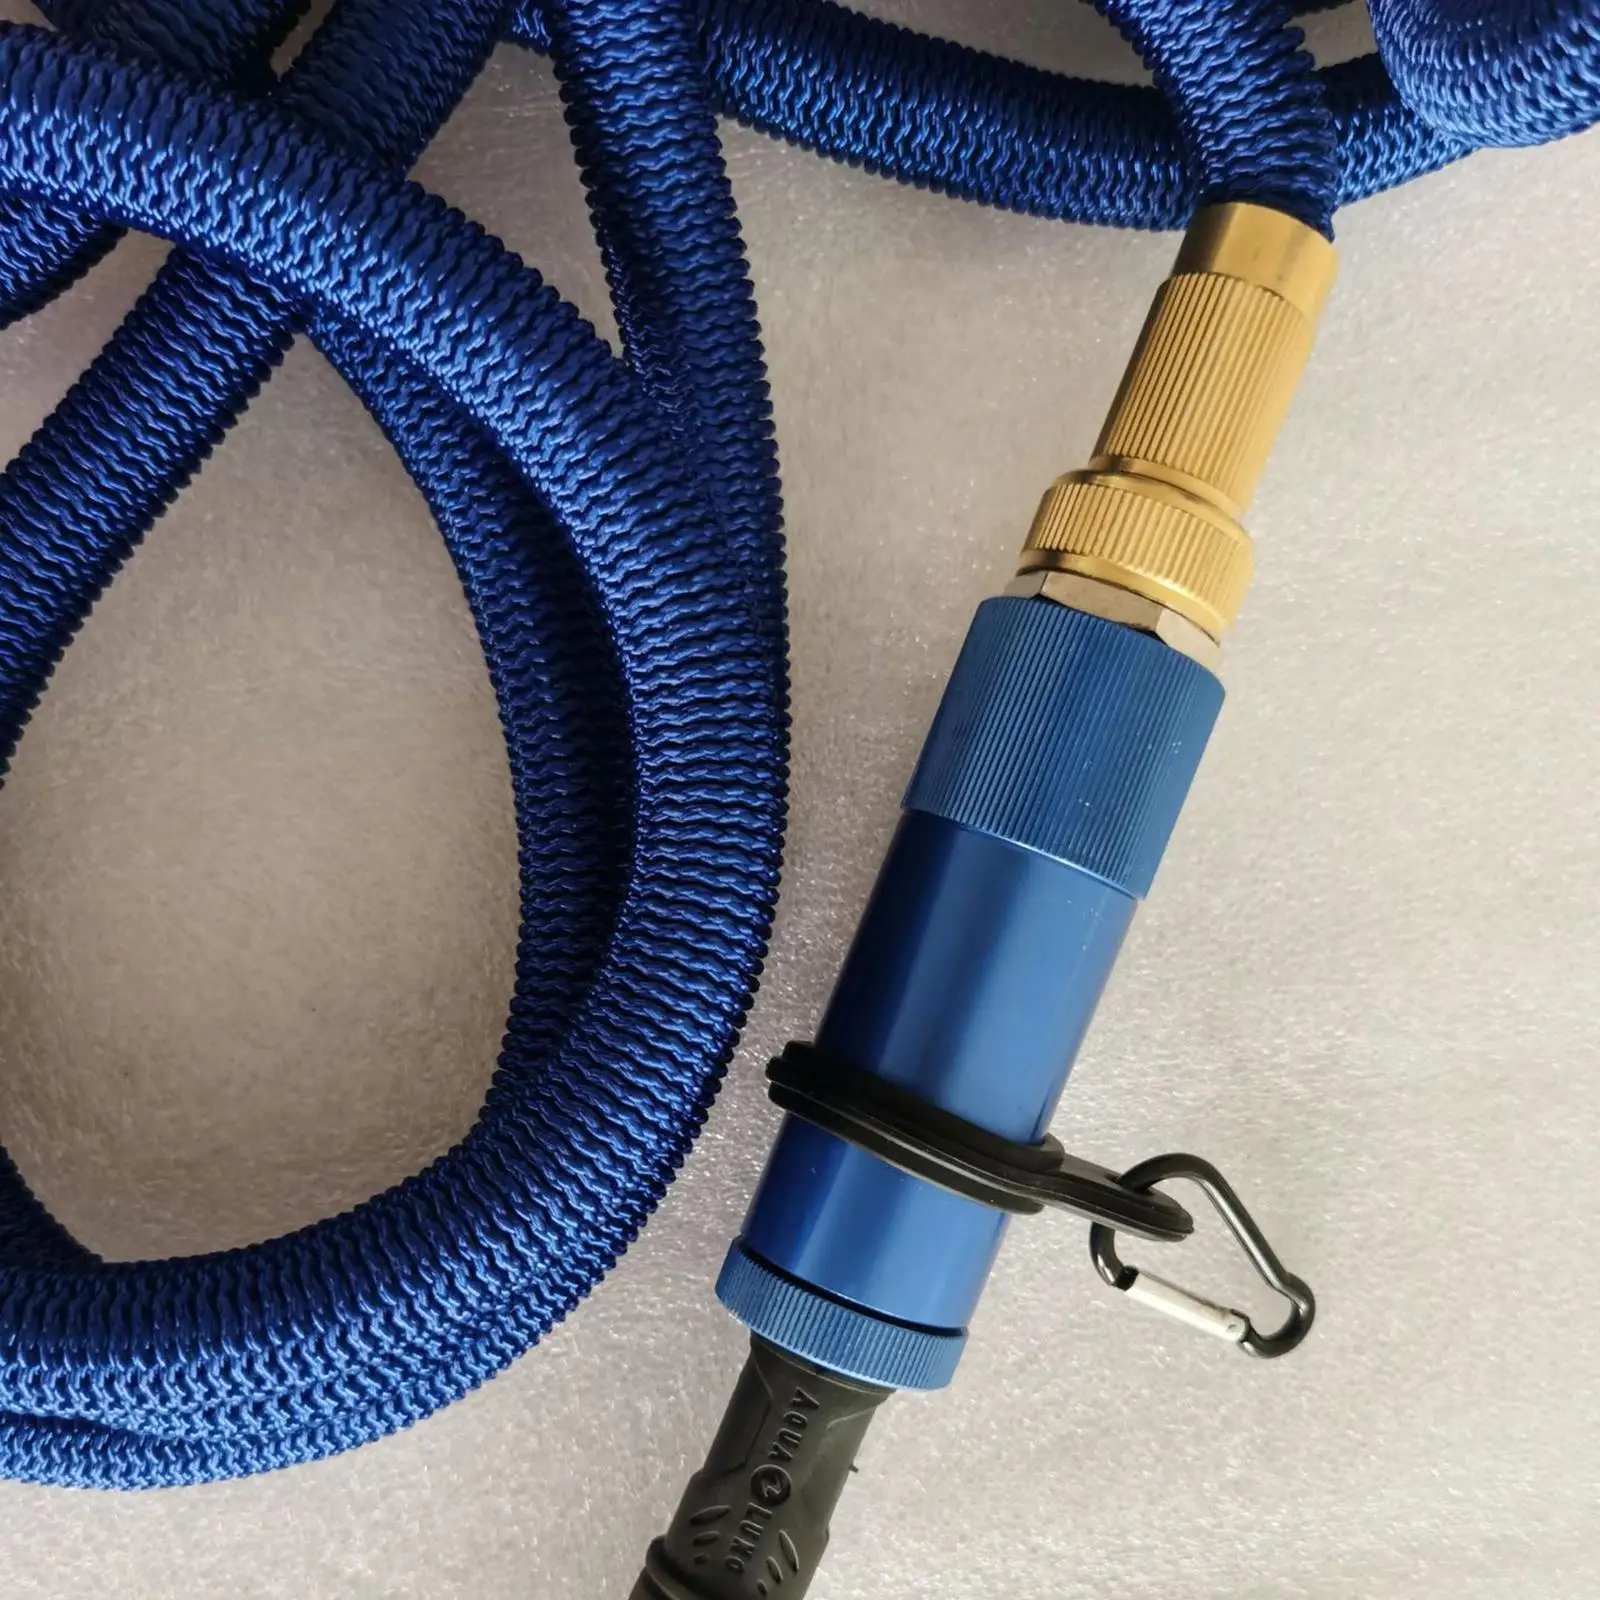 1x Diving Telescopic Tube 14M / 551.18inch Swimming Oxygen Supply Accessories